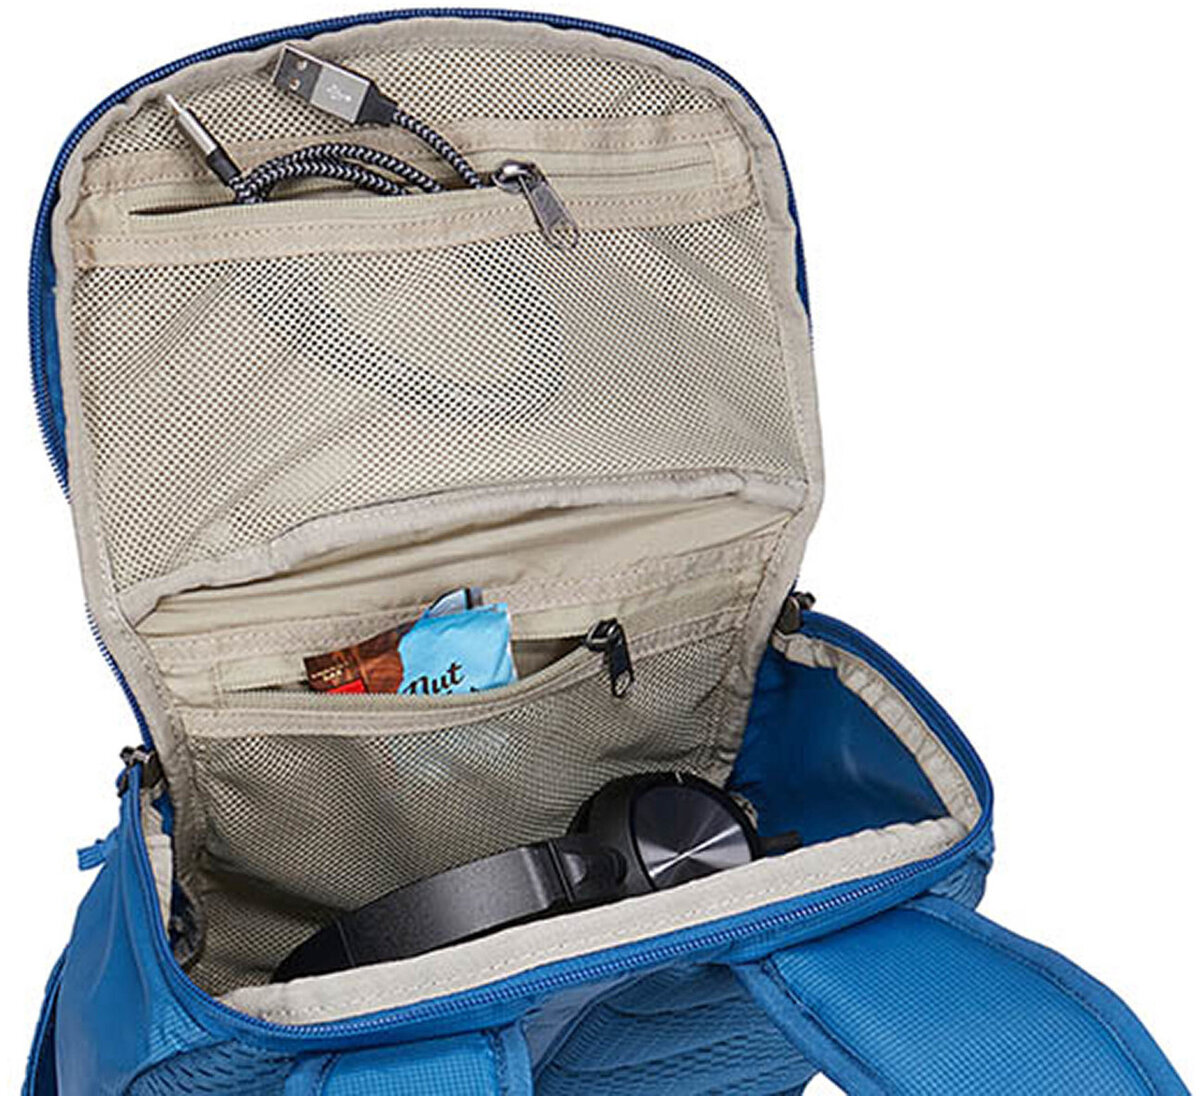 Thule EnRoute Backpack 14L Review